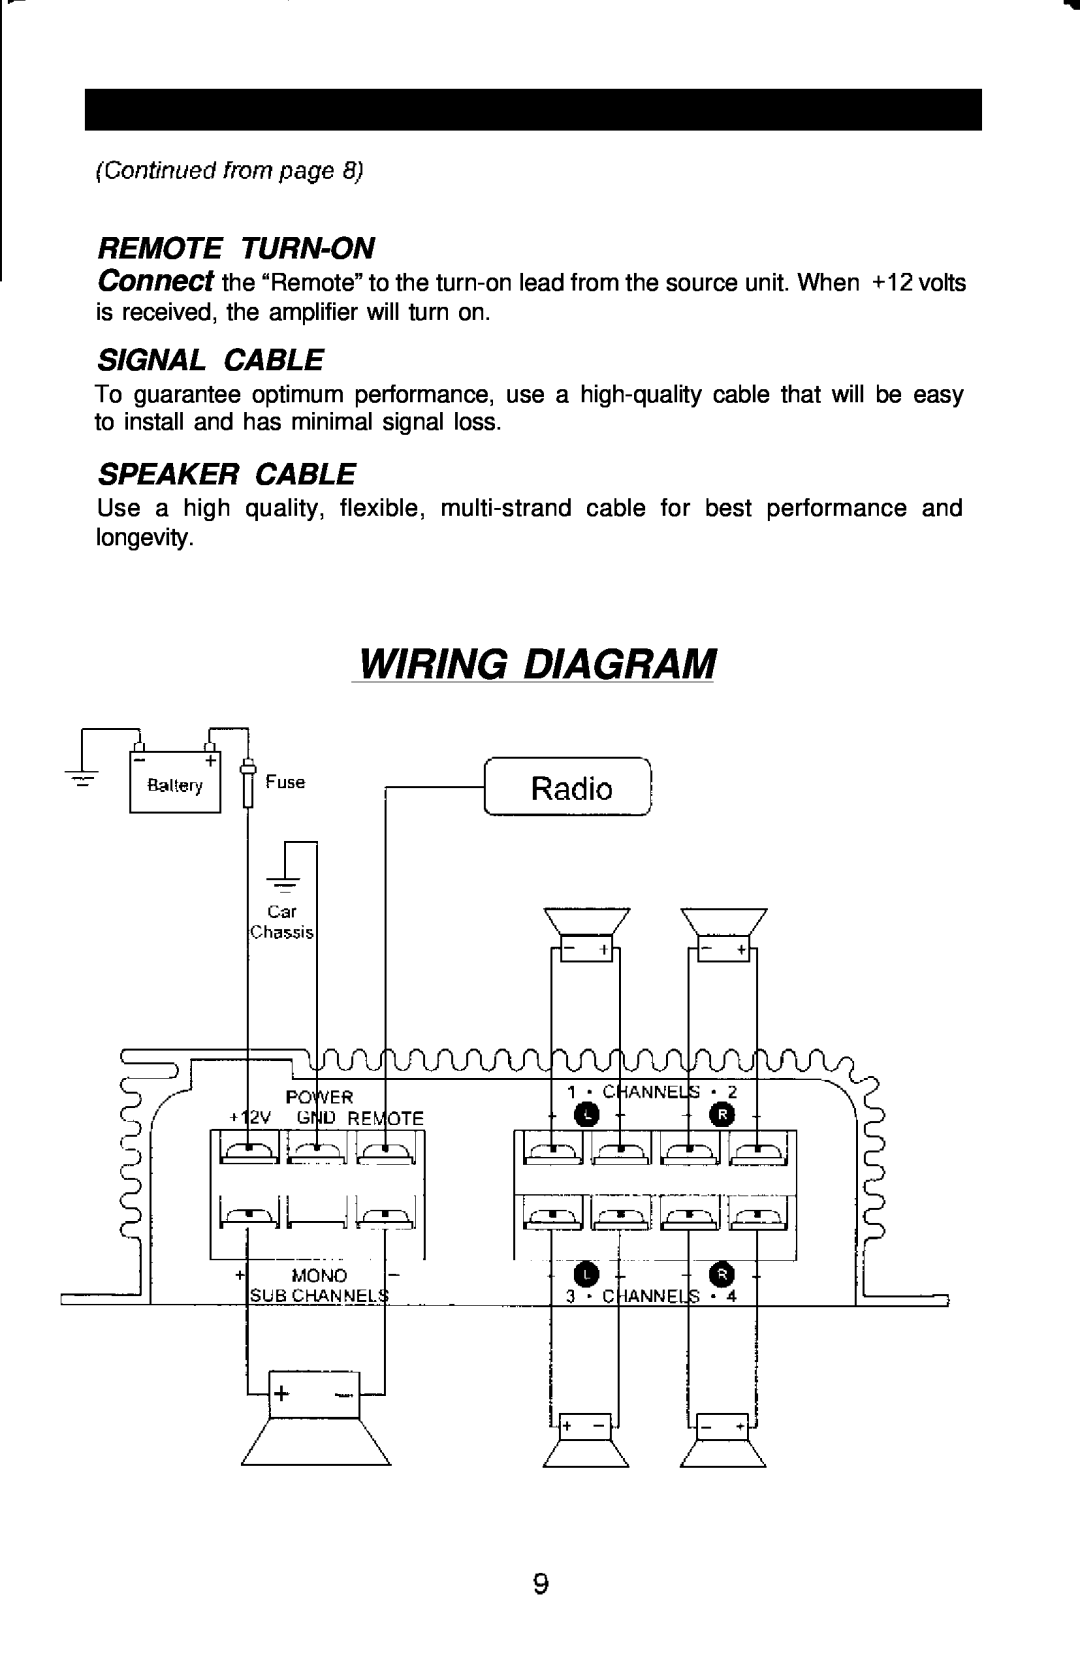 Soundstream Technologies P205, P203 owner manual Wiring Diagram, Remote Turn-On, Signal Cable, Speaker Cable 